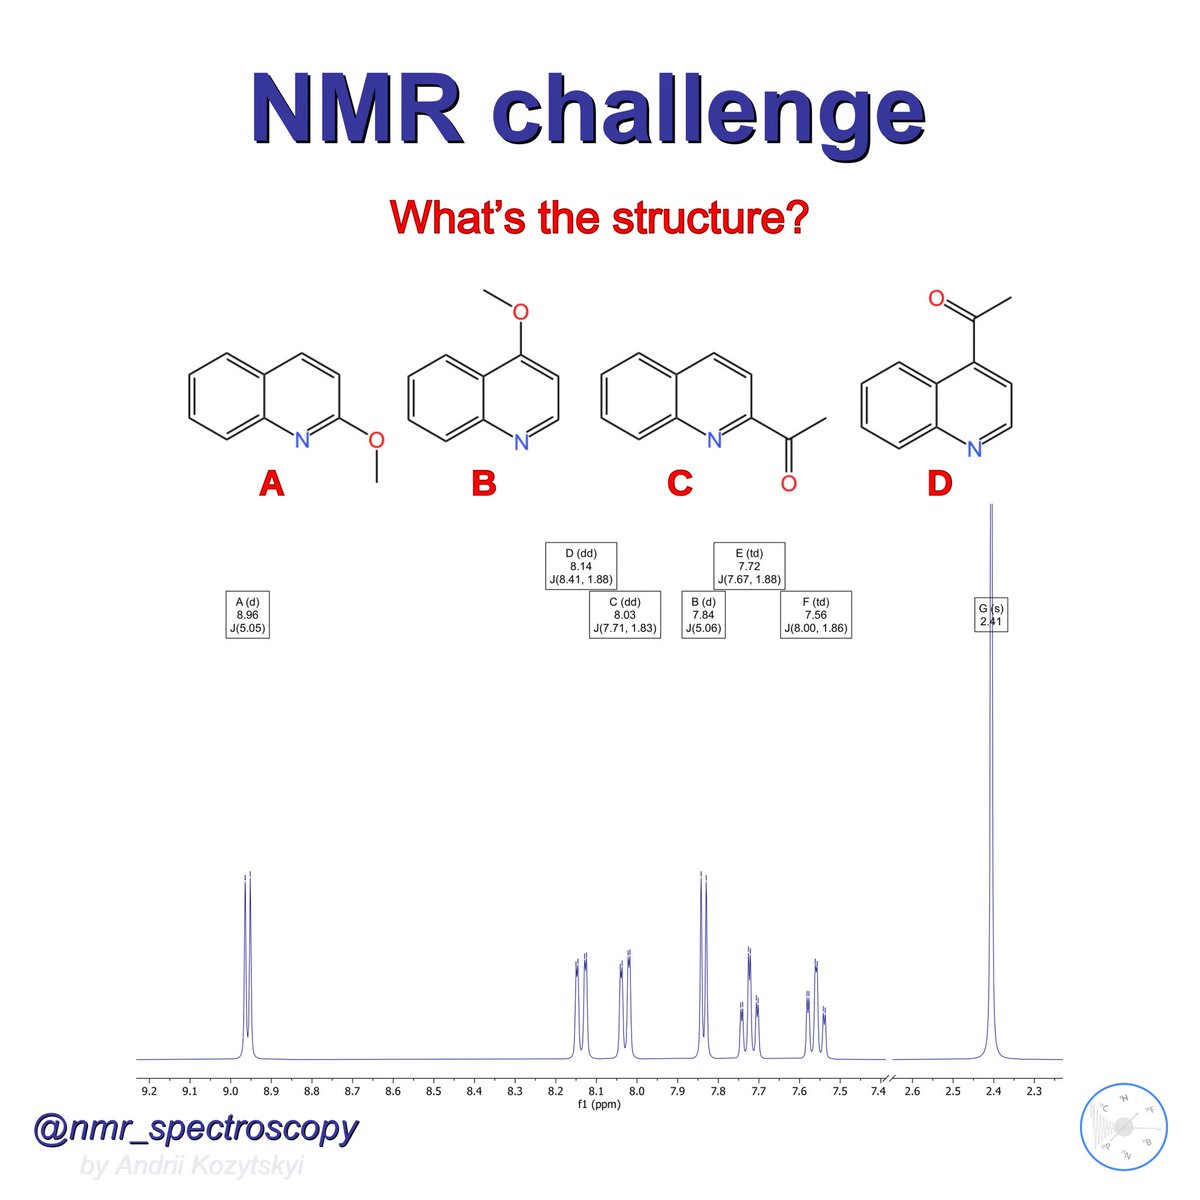 🧲⁉️Weekend NMR challenge 🧲⁉️
Write your answers in the comments section, use the poll, or stay tuned for the answer 😉
#nmr #nmrchat #nmrchallenge #chemistry #organicchemistry #spectroscopy